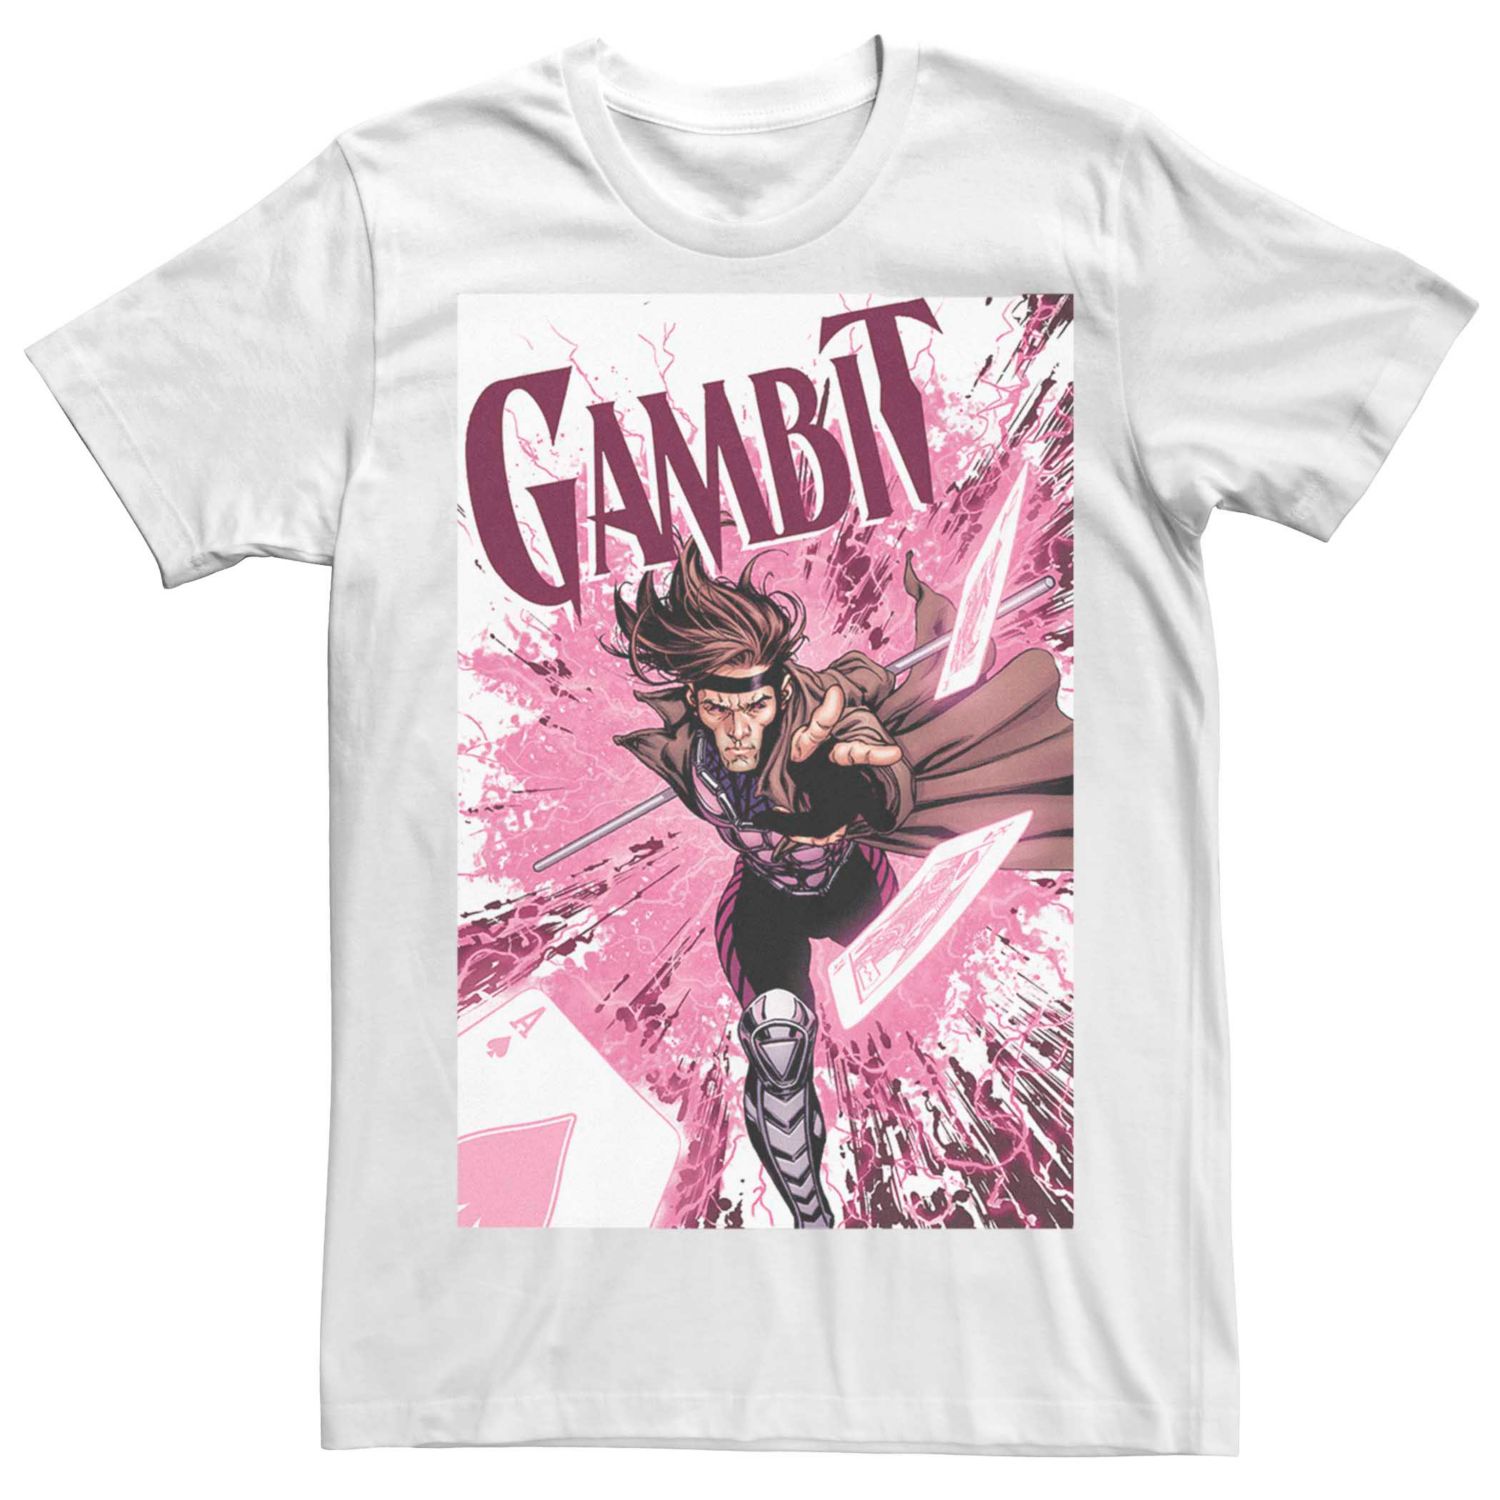 Image for Licensed Character Men's X-Men Gambit Graphic Tee at Kohl's.